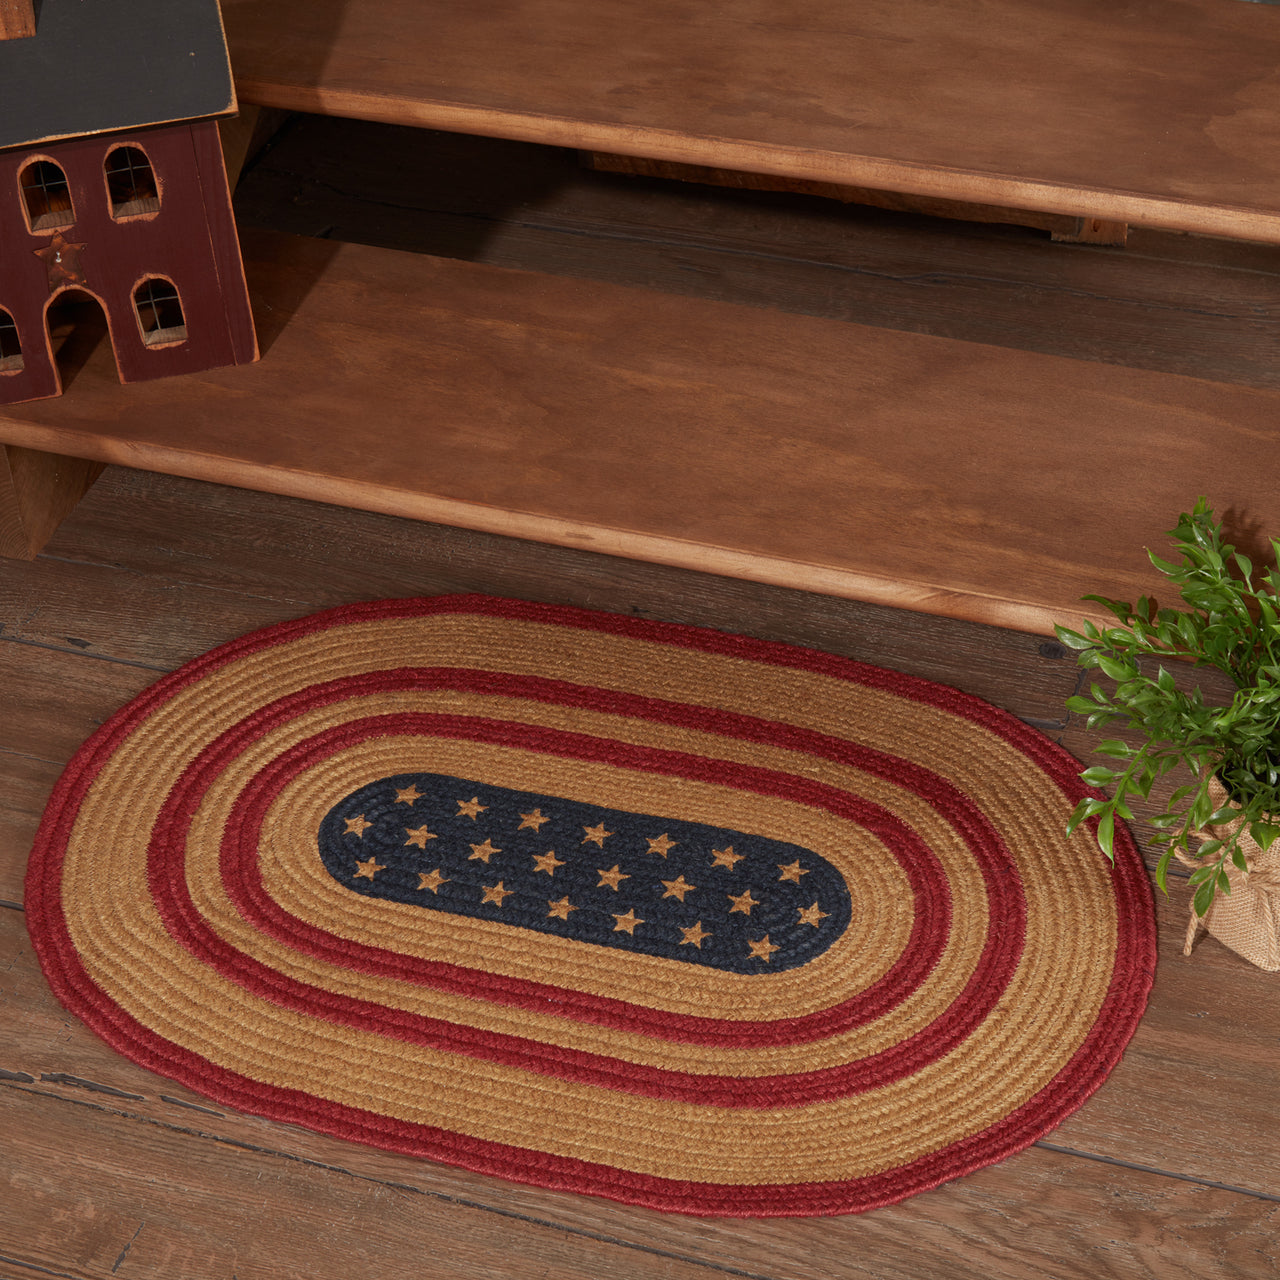 Liberty Stars Flag Jute Braided Rug Oval 20"x30" with Rug Pad VHC Brands